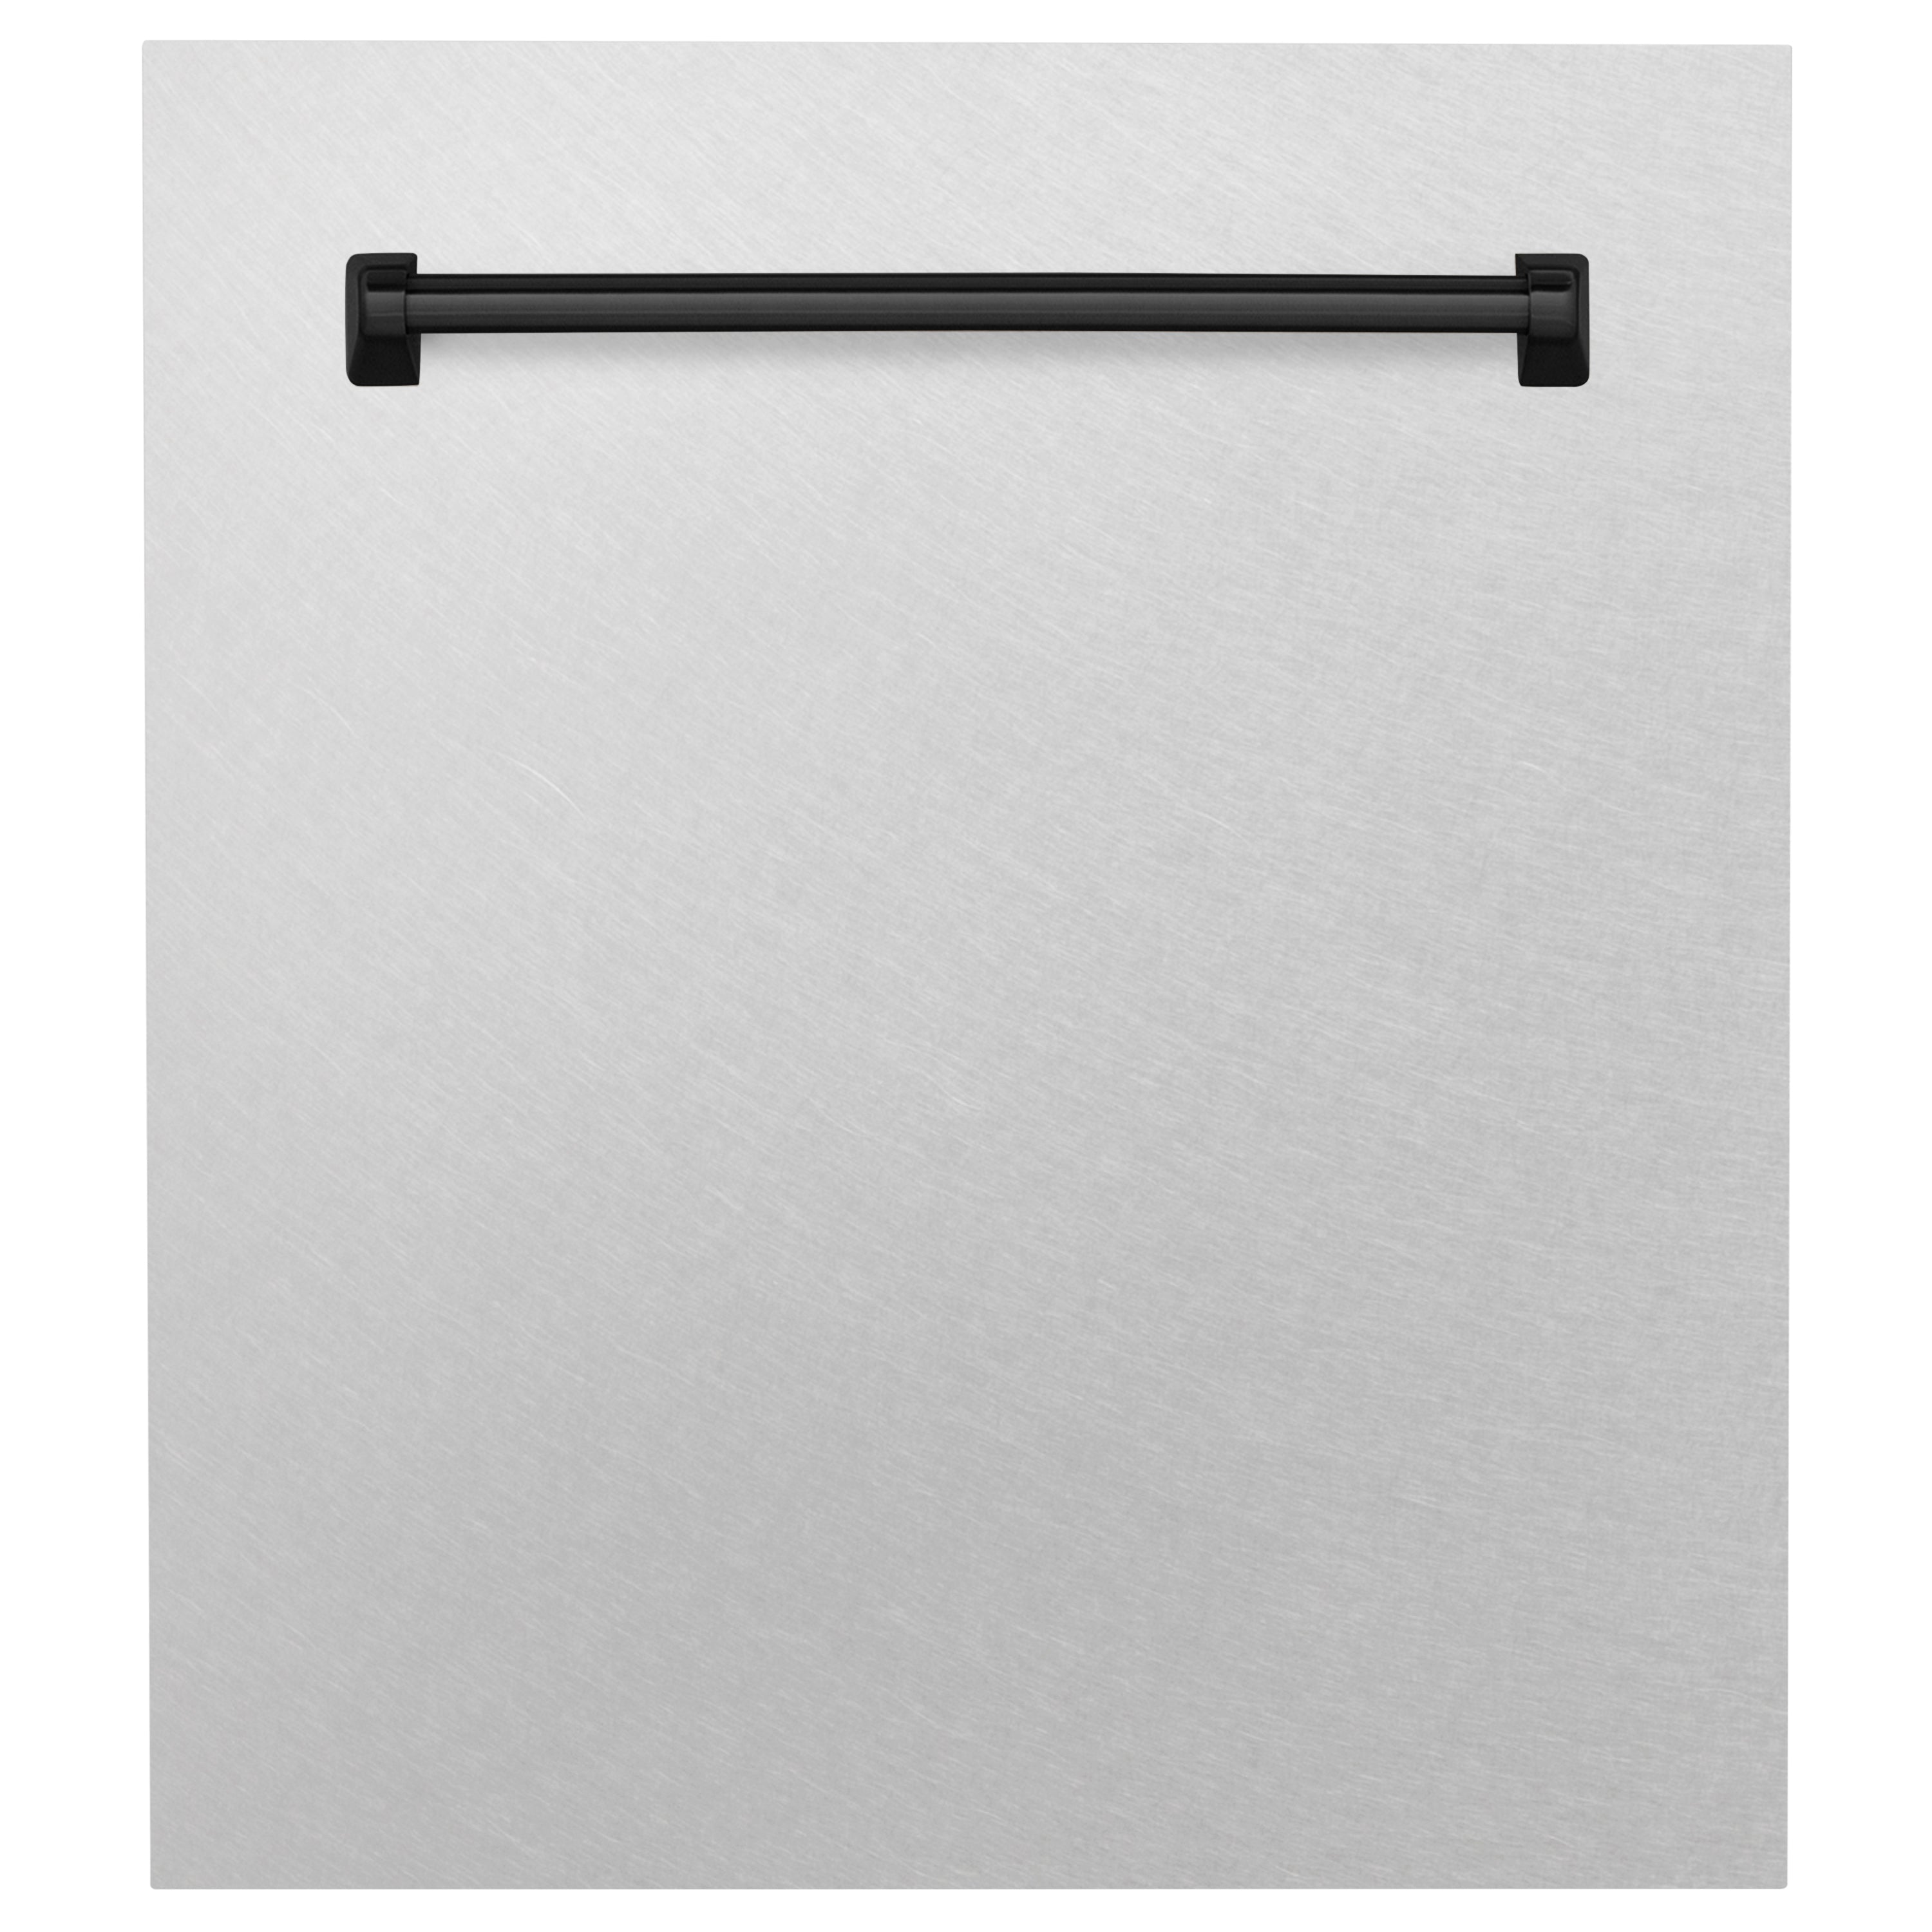 ZLINE 24" Autograph Edition Tallac Dishwasher Panel in Fingerprint Resistant Stainless Steel with Matte Black Handle (DPVZ-SN-24-MB)